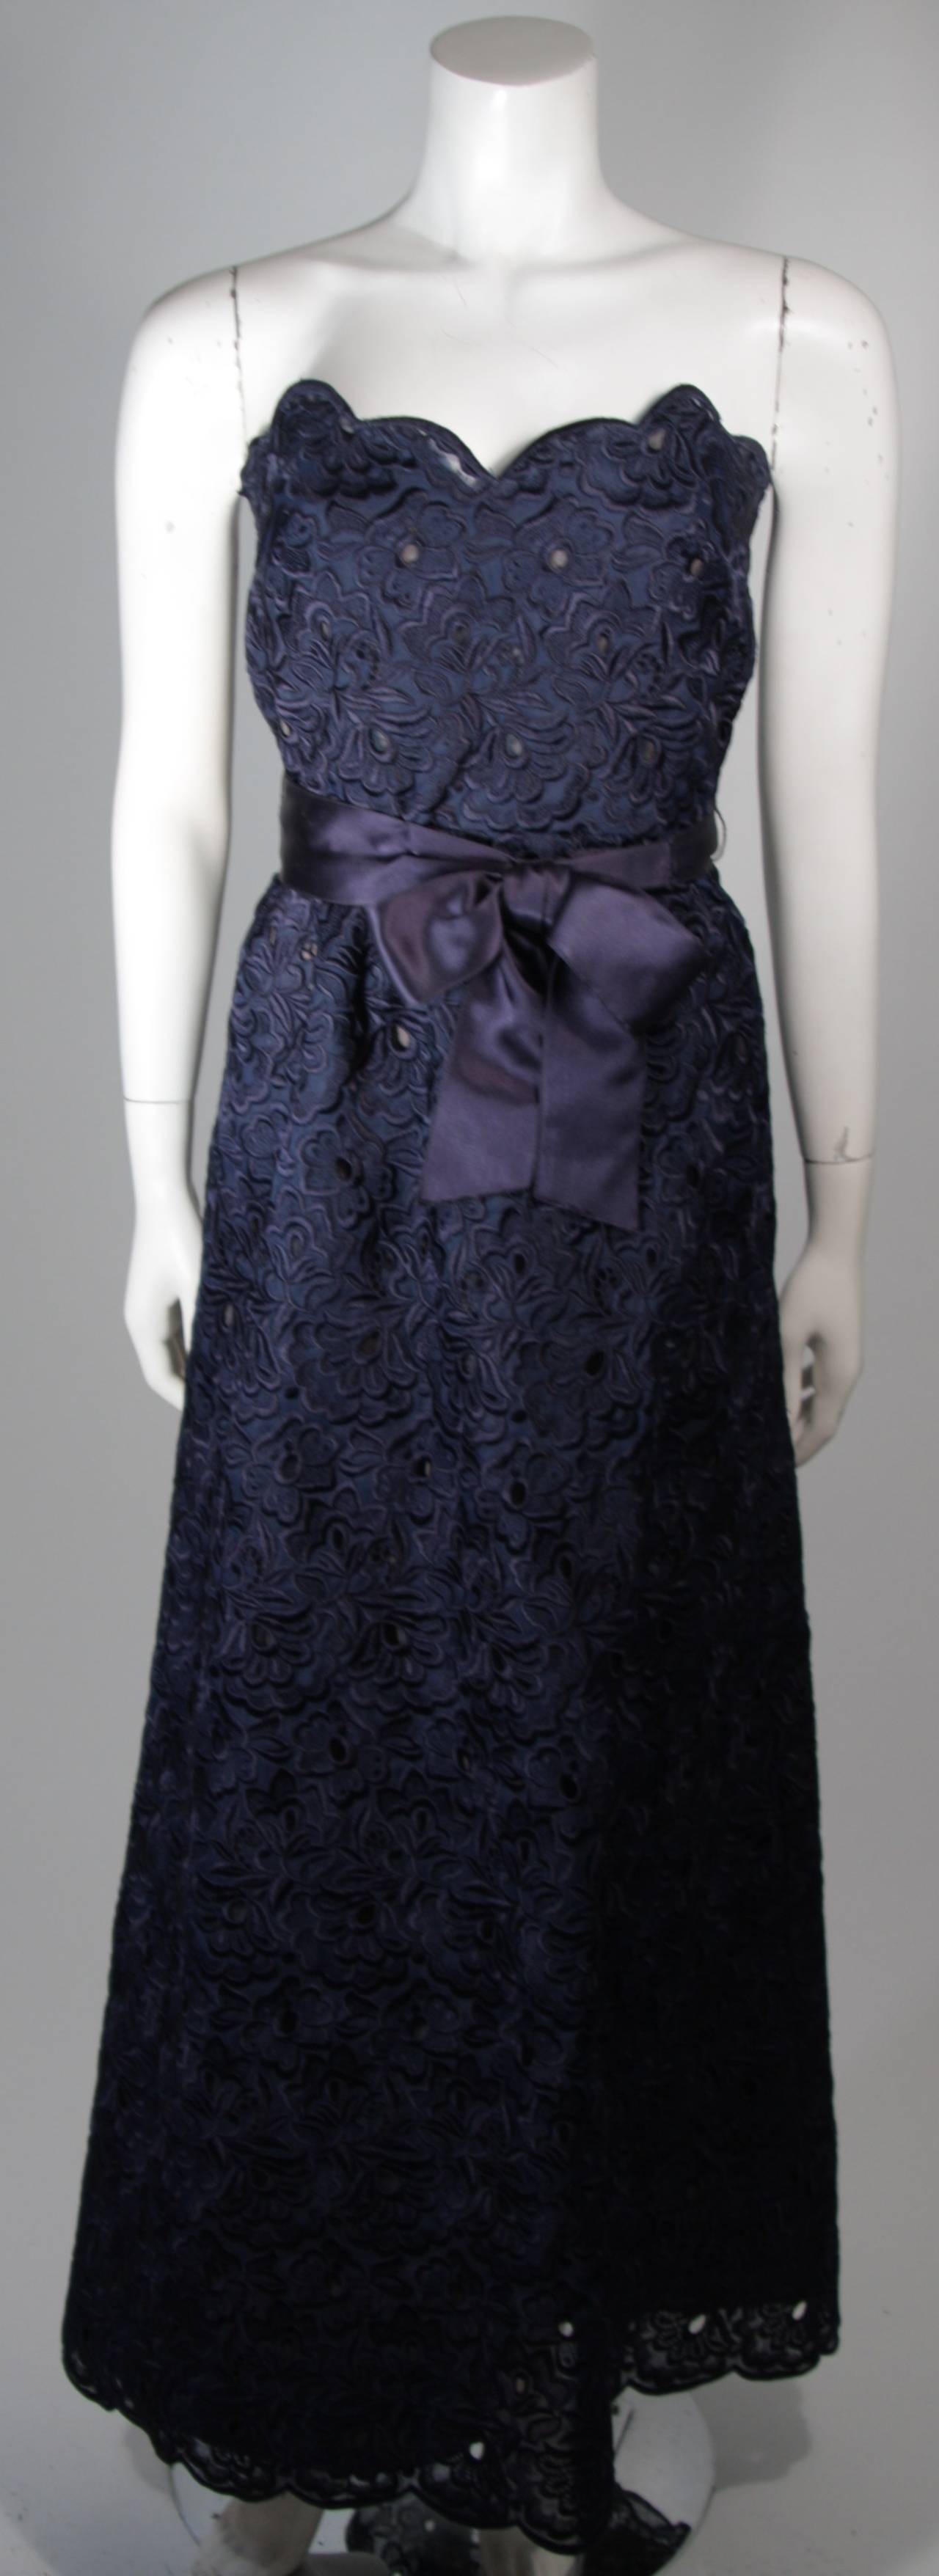 This Scaasi gown is composed of a navy lace and features a satin belt. There is a zipper closure. In excellent condition. Made in U.S.A. 

**Please cross-reference measurements for personal accuracy. The size listed in the description box is an